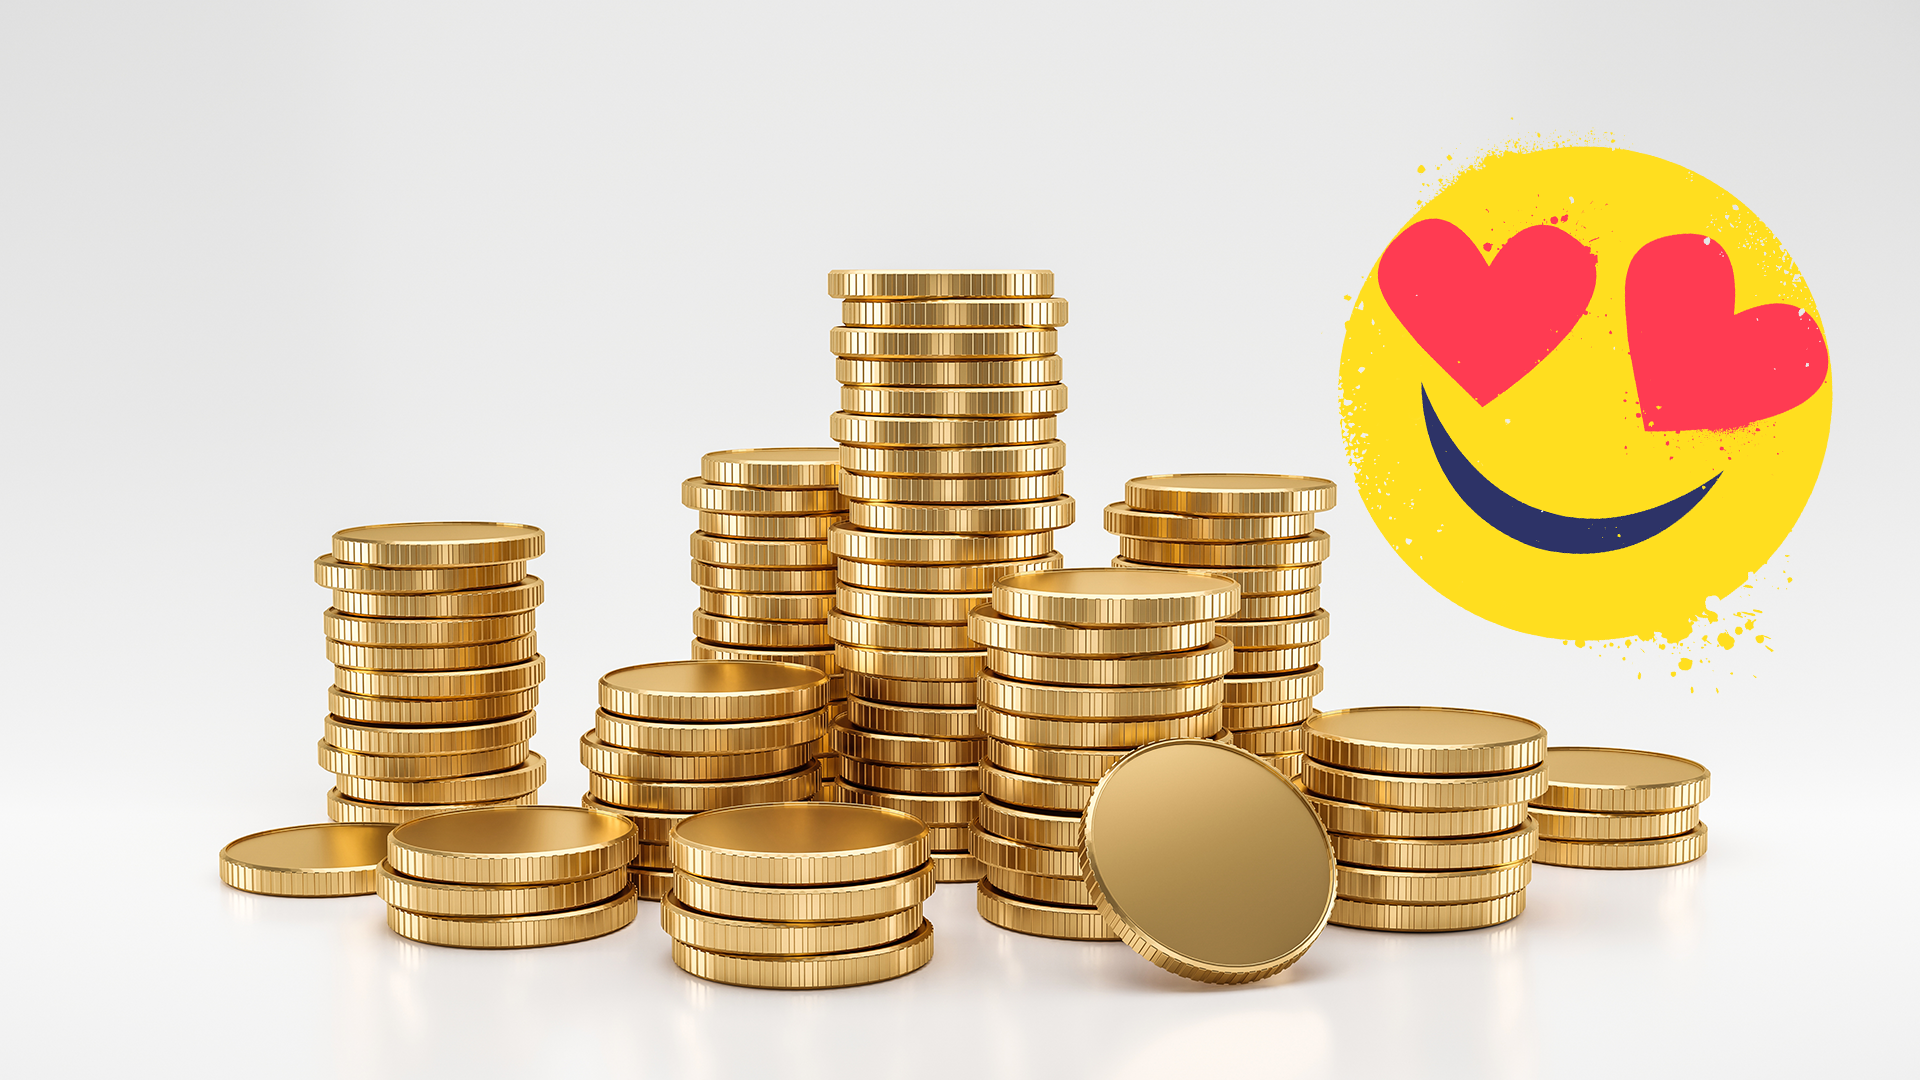 Heap of gold coins and heart-eyes emoji on white background 